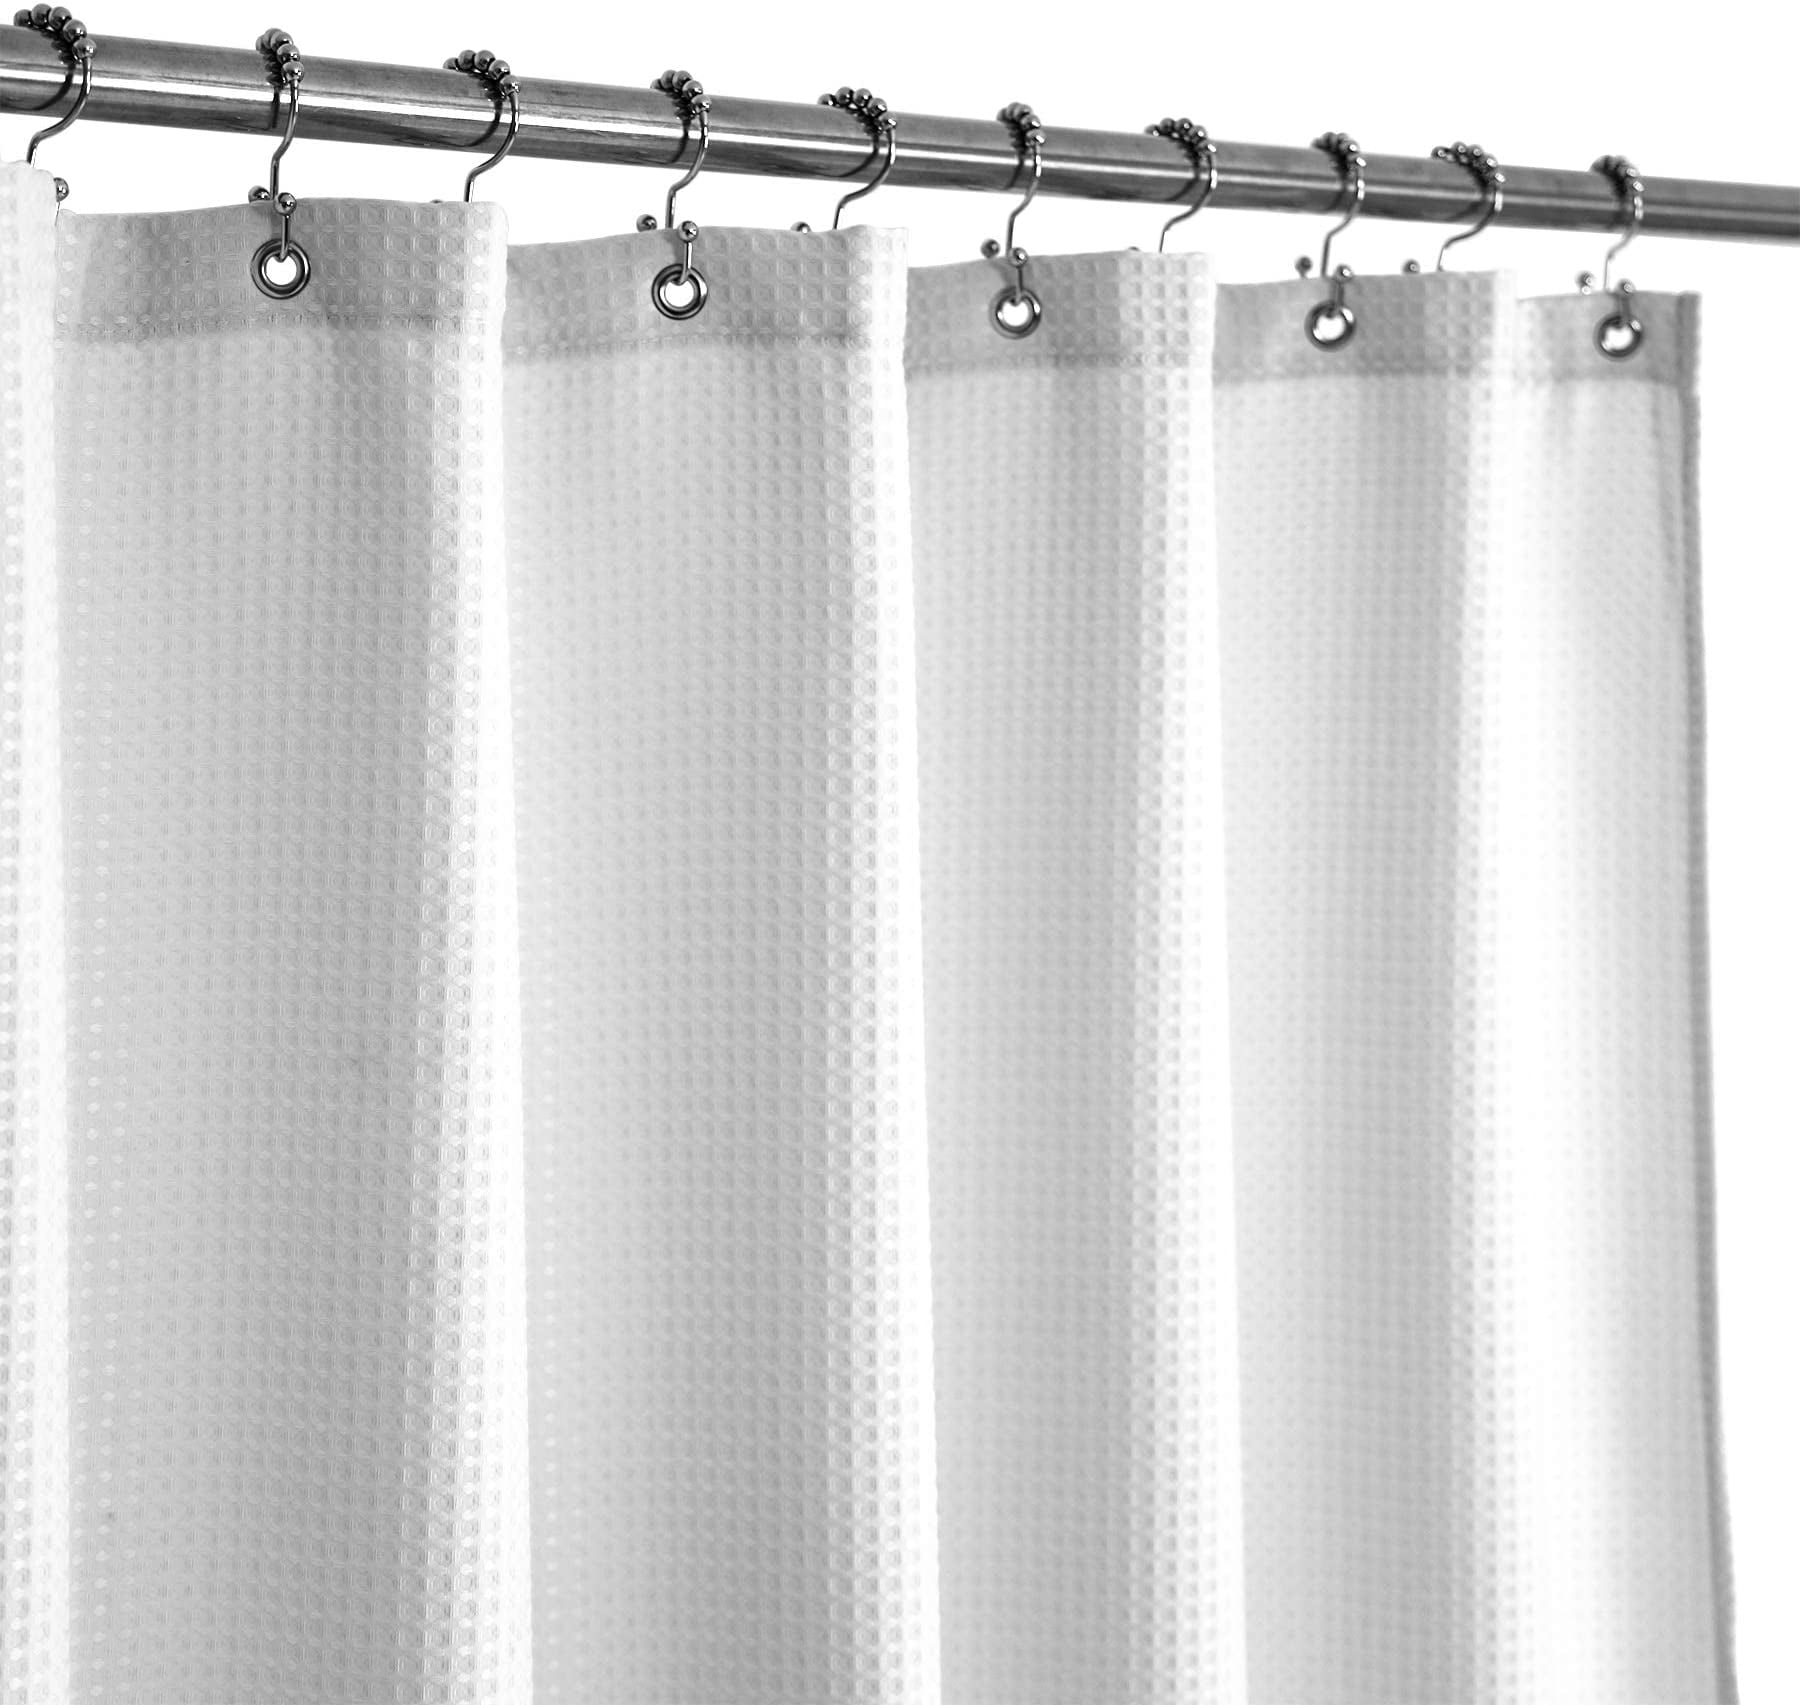 Spa Water Repellent 36x96Take a Bath White 230gsm Heavy Duty Washable Hotel Grade Stall Fabric Shower Curtain Waffle Weave 36 x 96 inches Extra Long Size